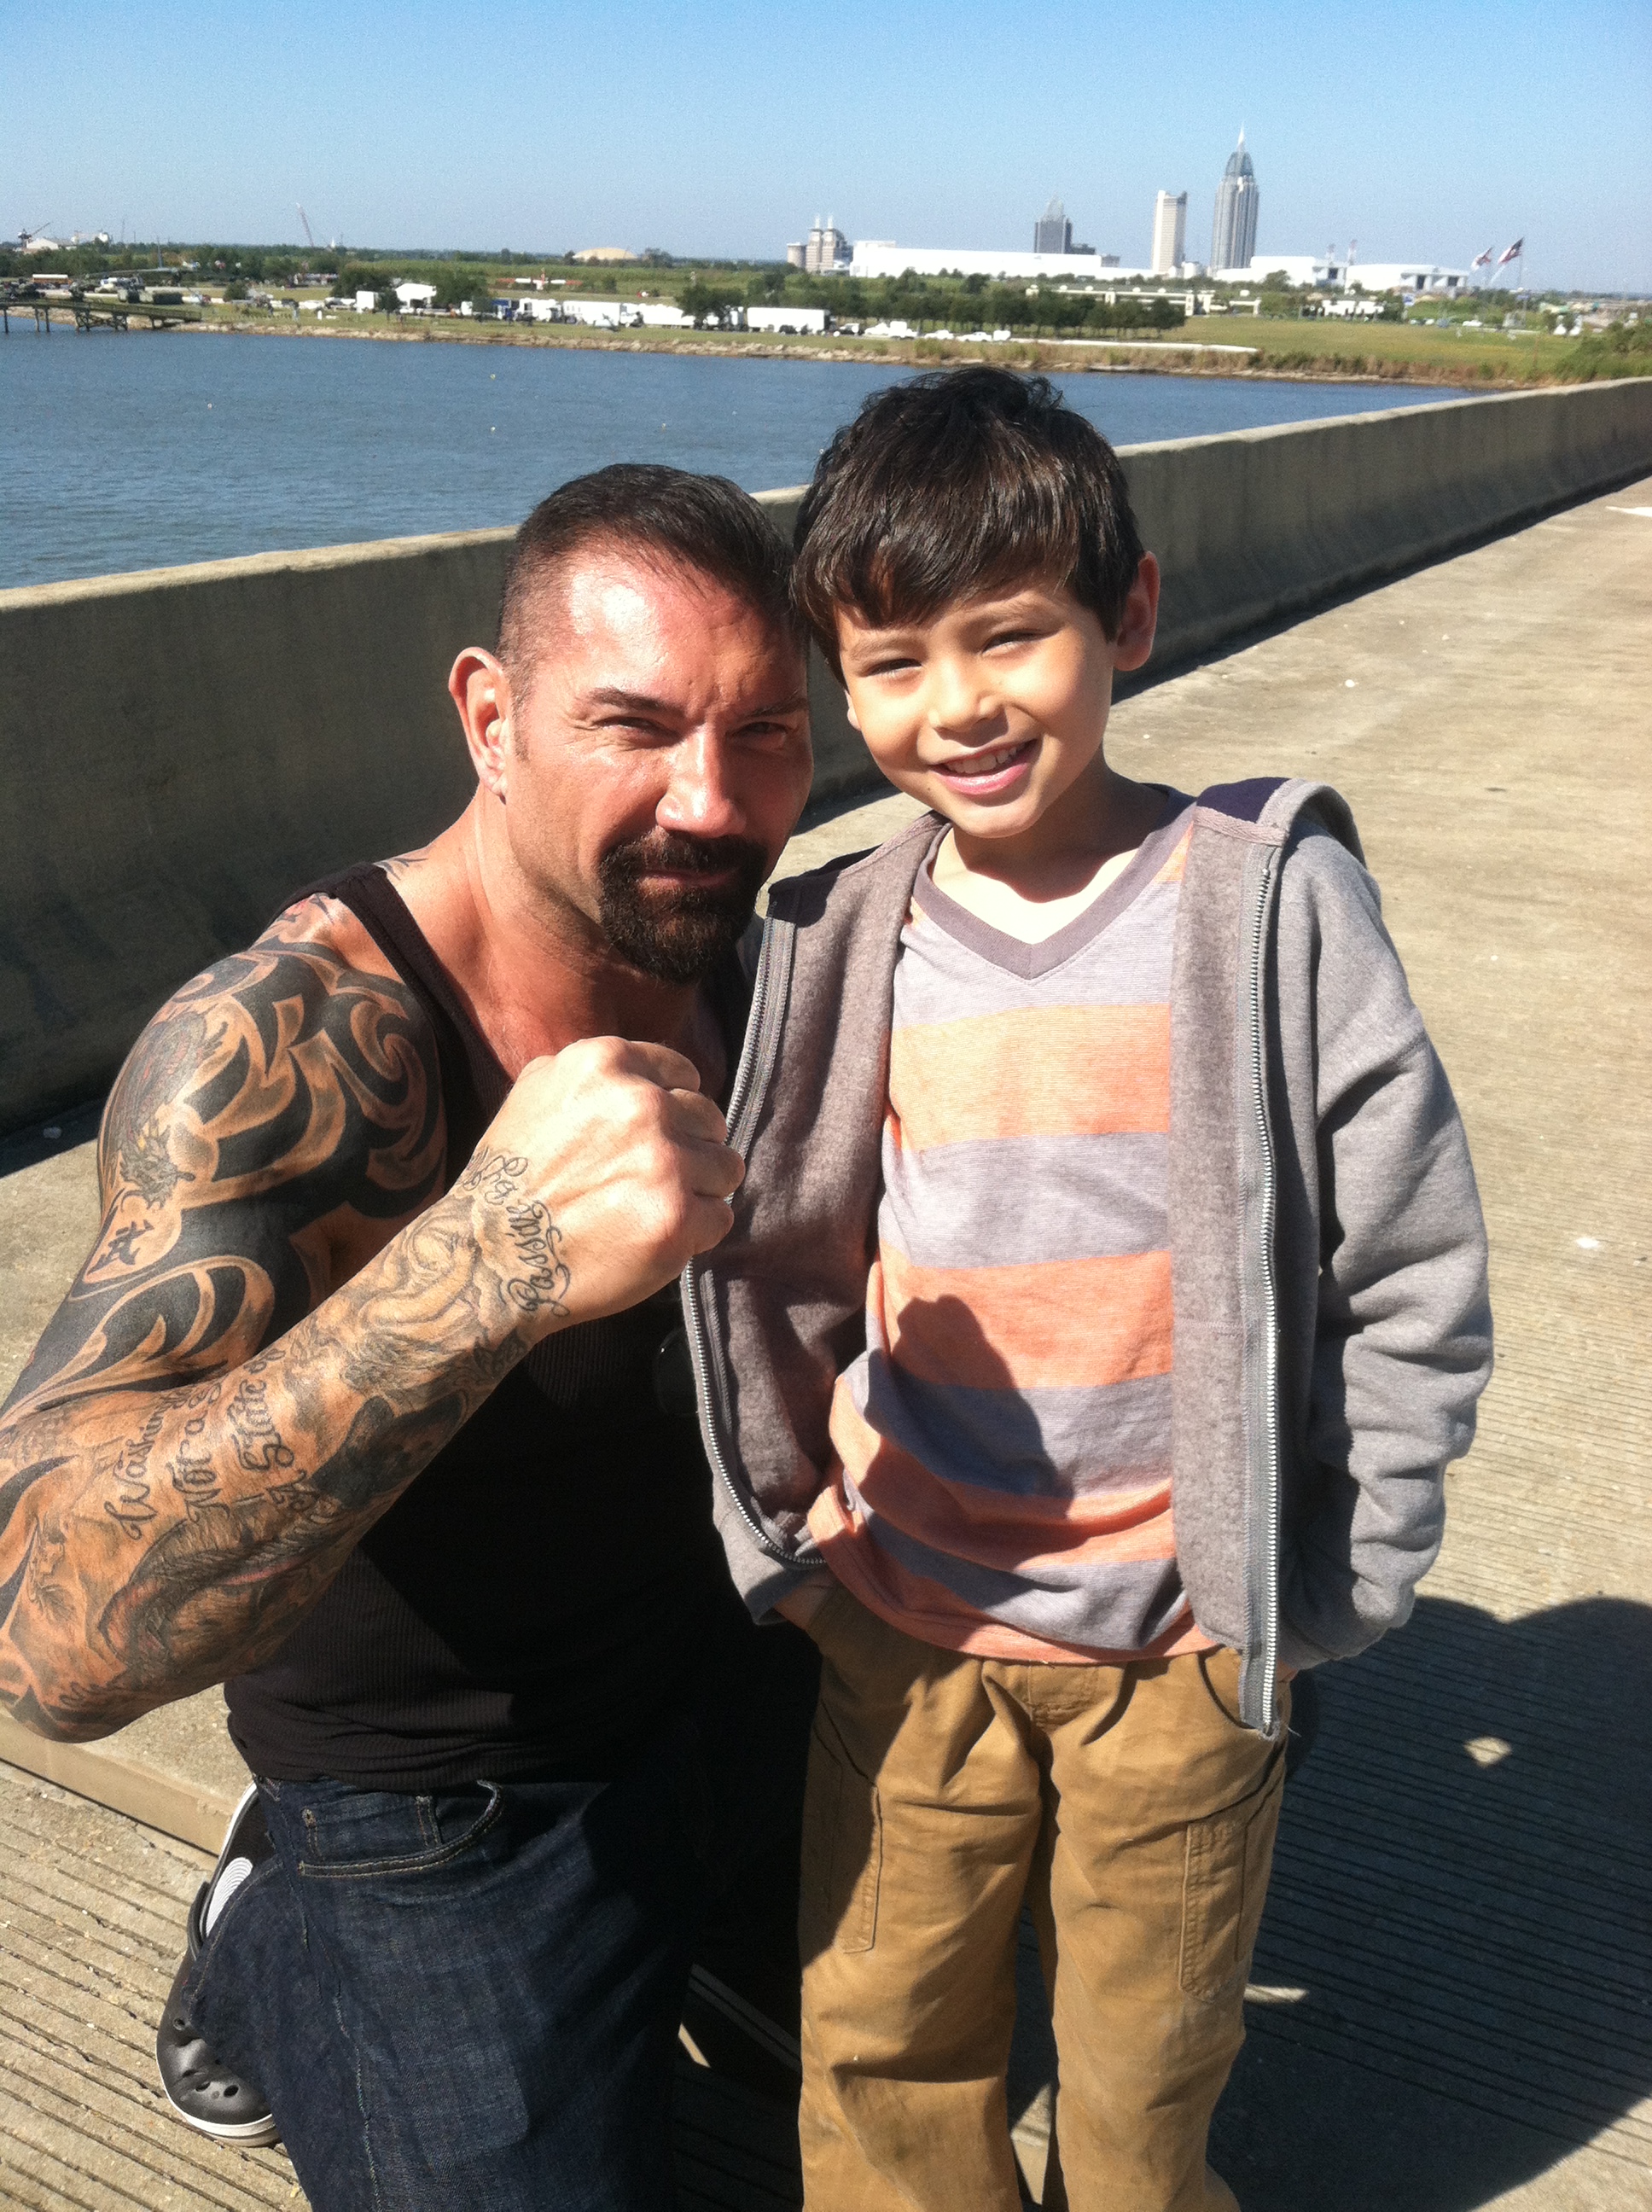 Colin Lawless with Dave Bautista on set of the movie Heist.